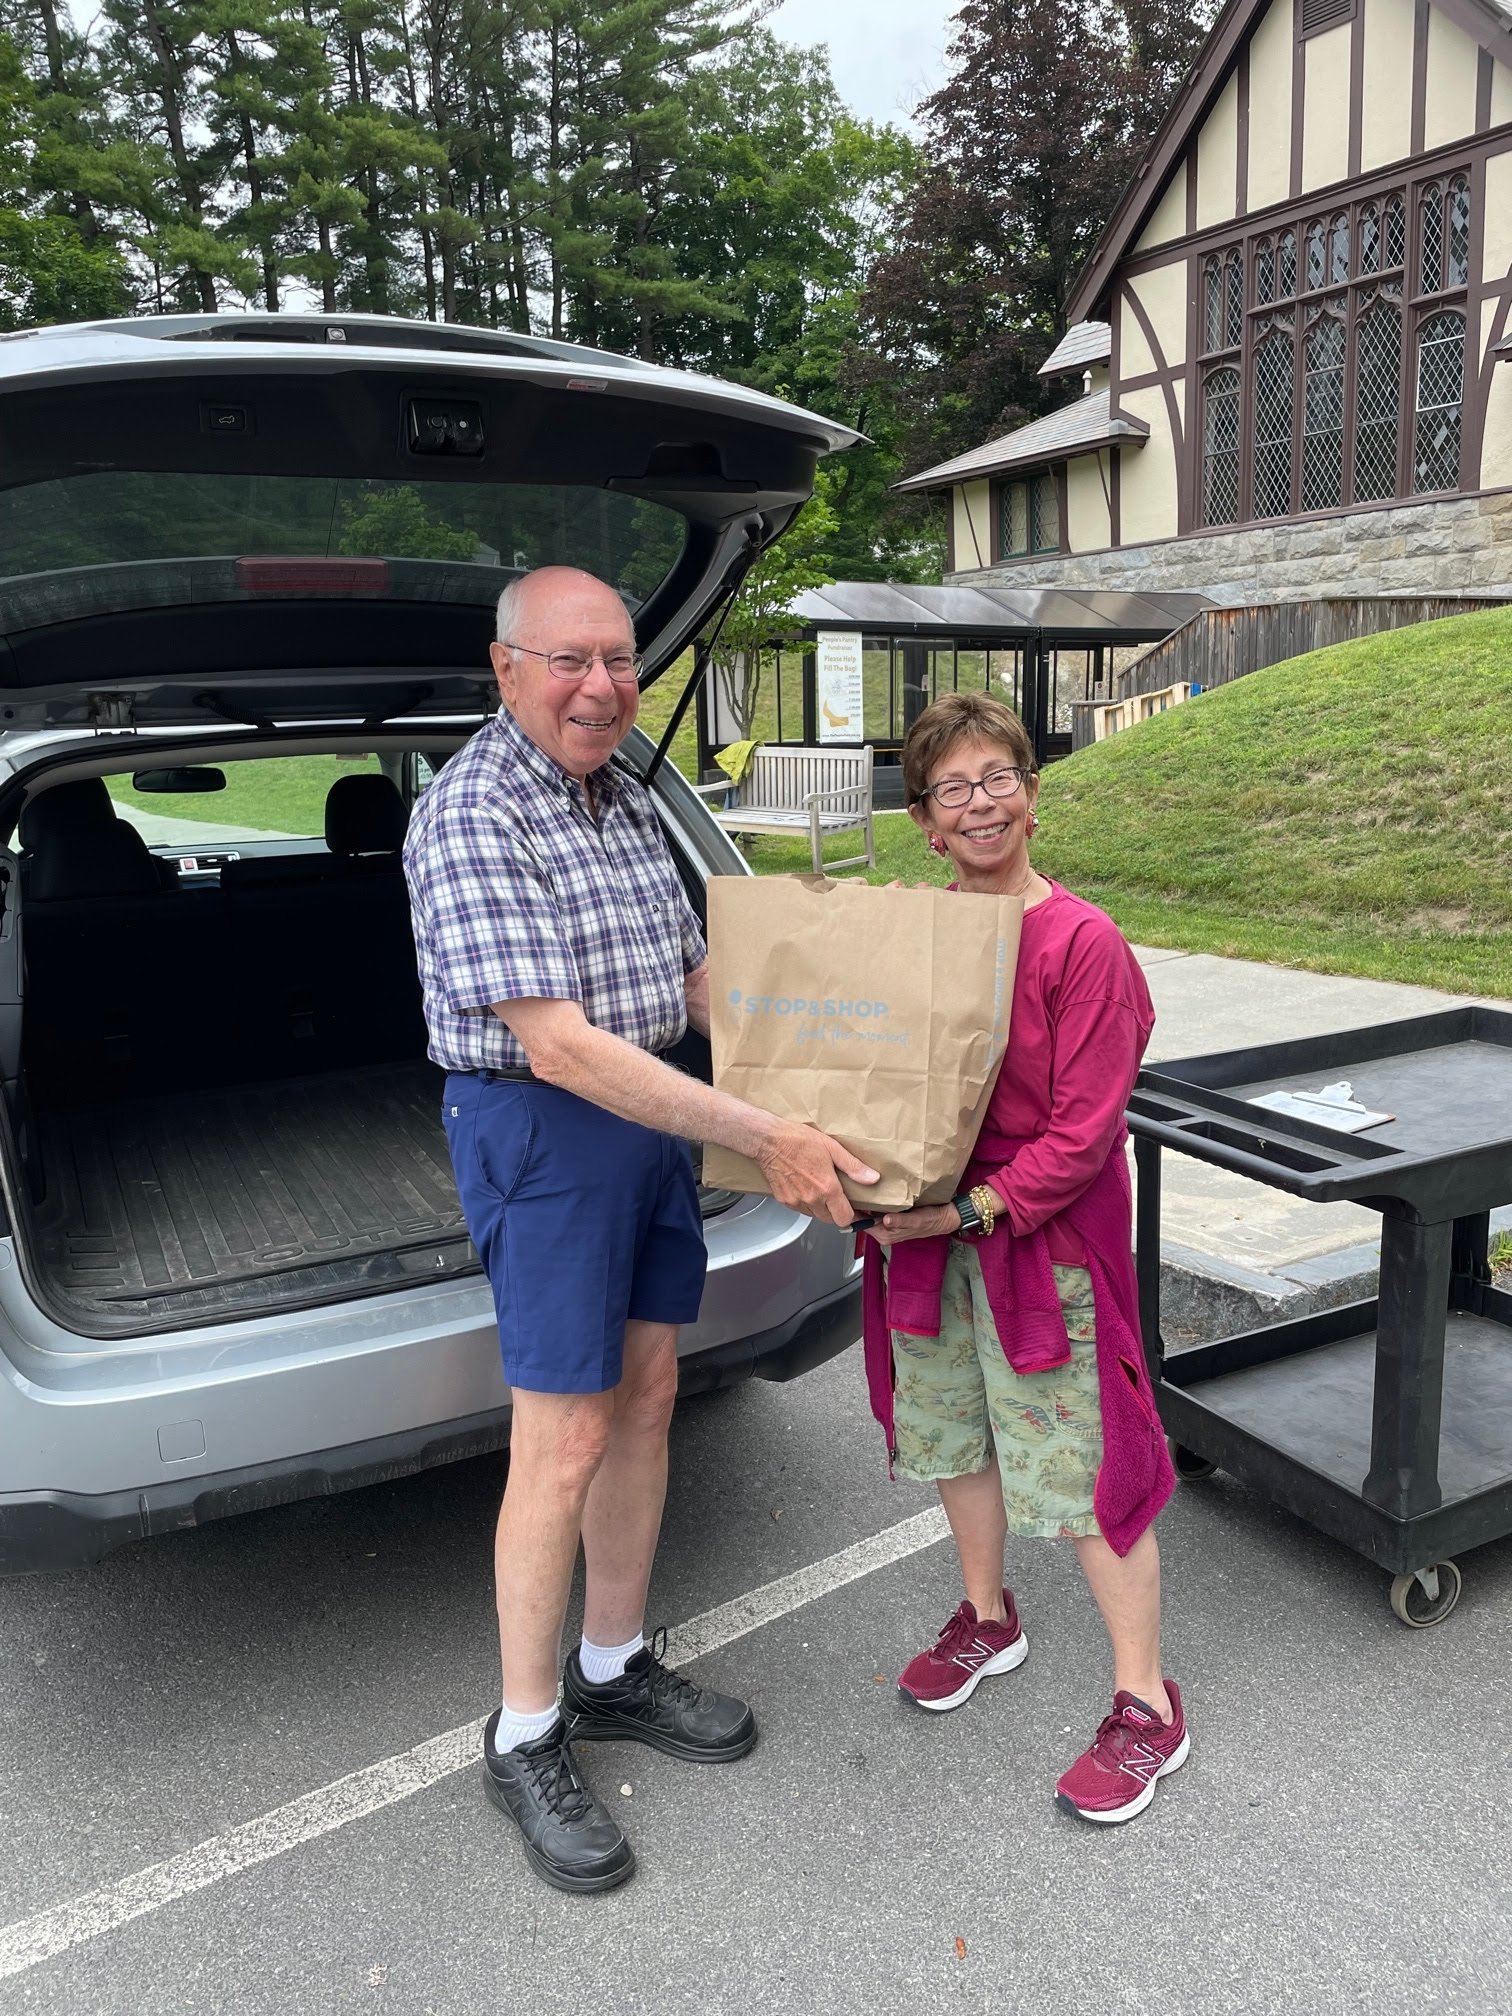 Berkshire Bounty is partnering with the Jewish Federation of the Berkshires for their rice and pasta food drive. For the whole month of May, collection boxes will the placed in several locations in the Berkshires including:

  Hevreh in Great Barring